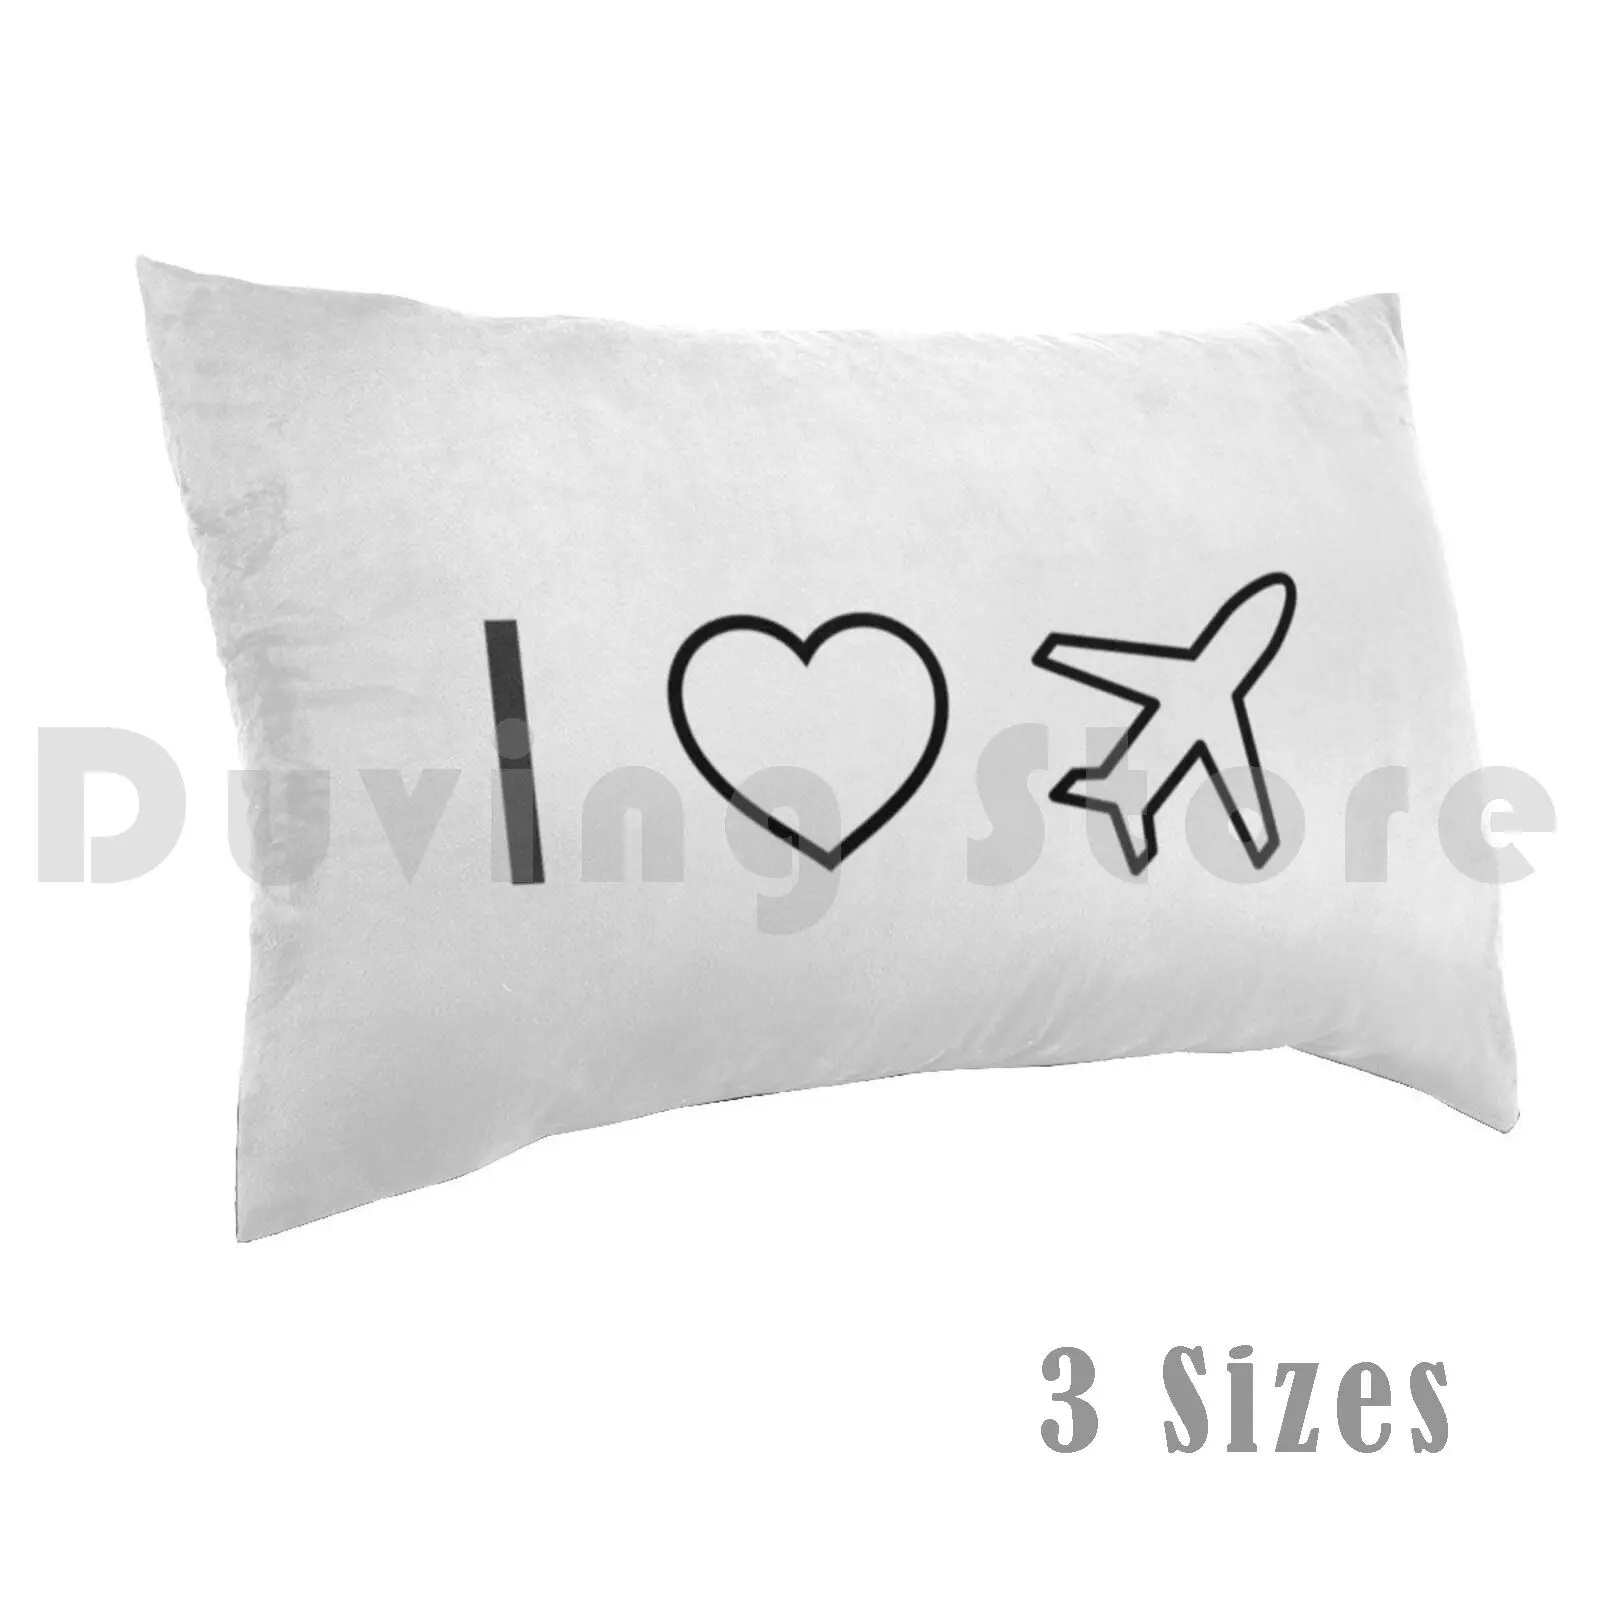 

I Love Planes Aviation Funny Cute Pillow Case Printed 50x75 Aviation Pilot Airplane Flying Plane Fly